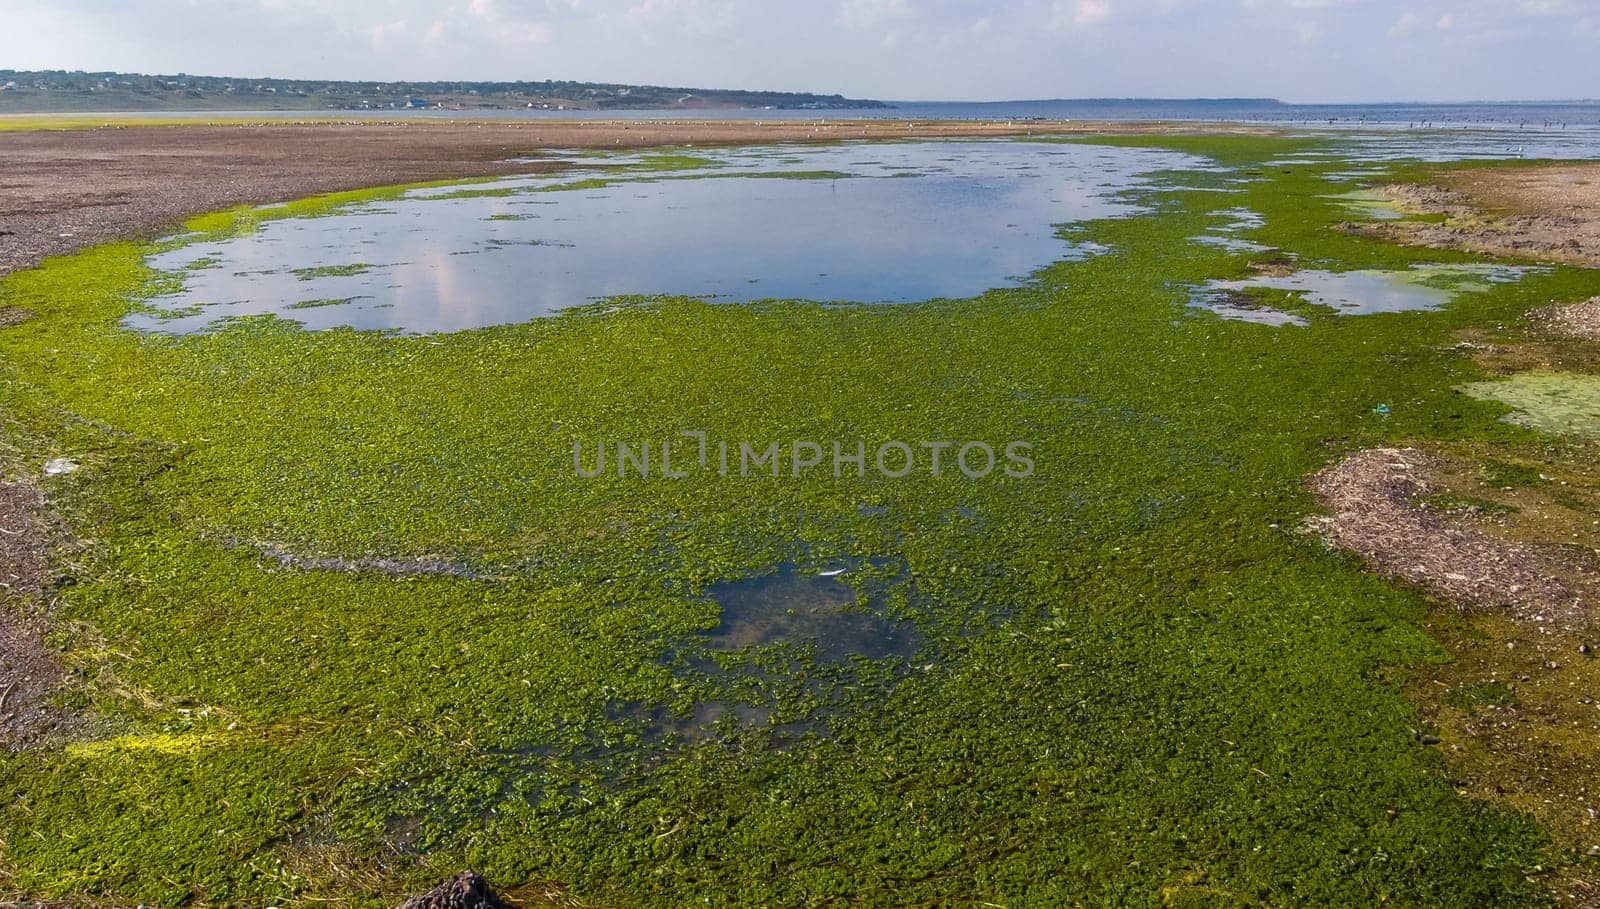 A large accumulation of green algae Ulva and Enteromorpha in a shallow estuary, eutrophication in the sea